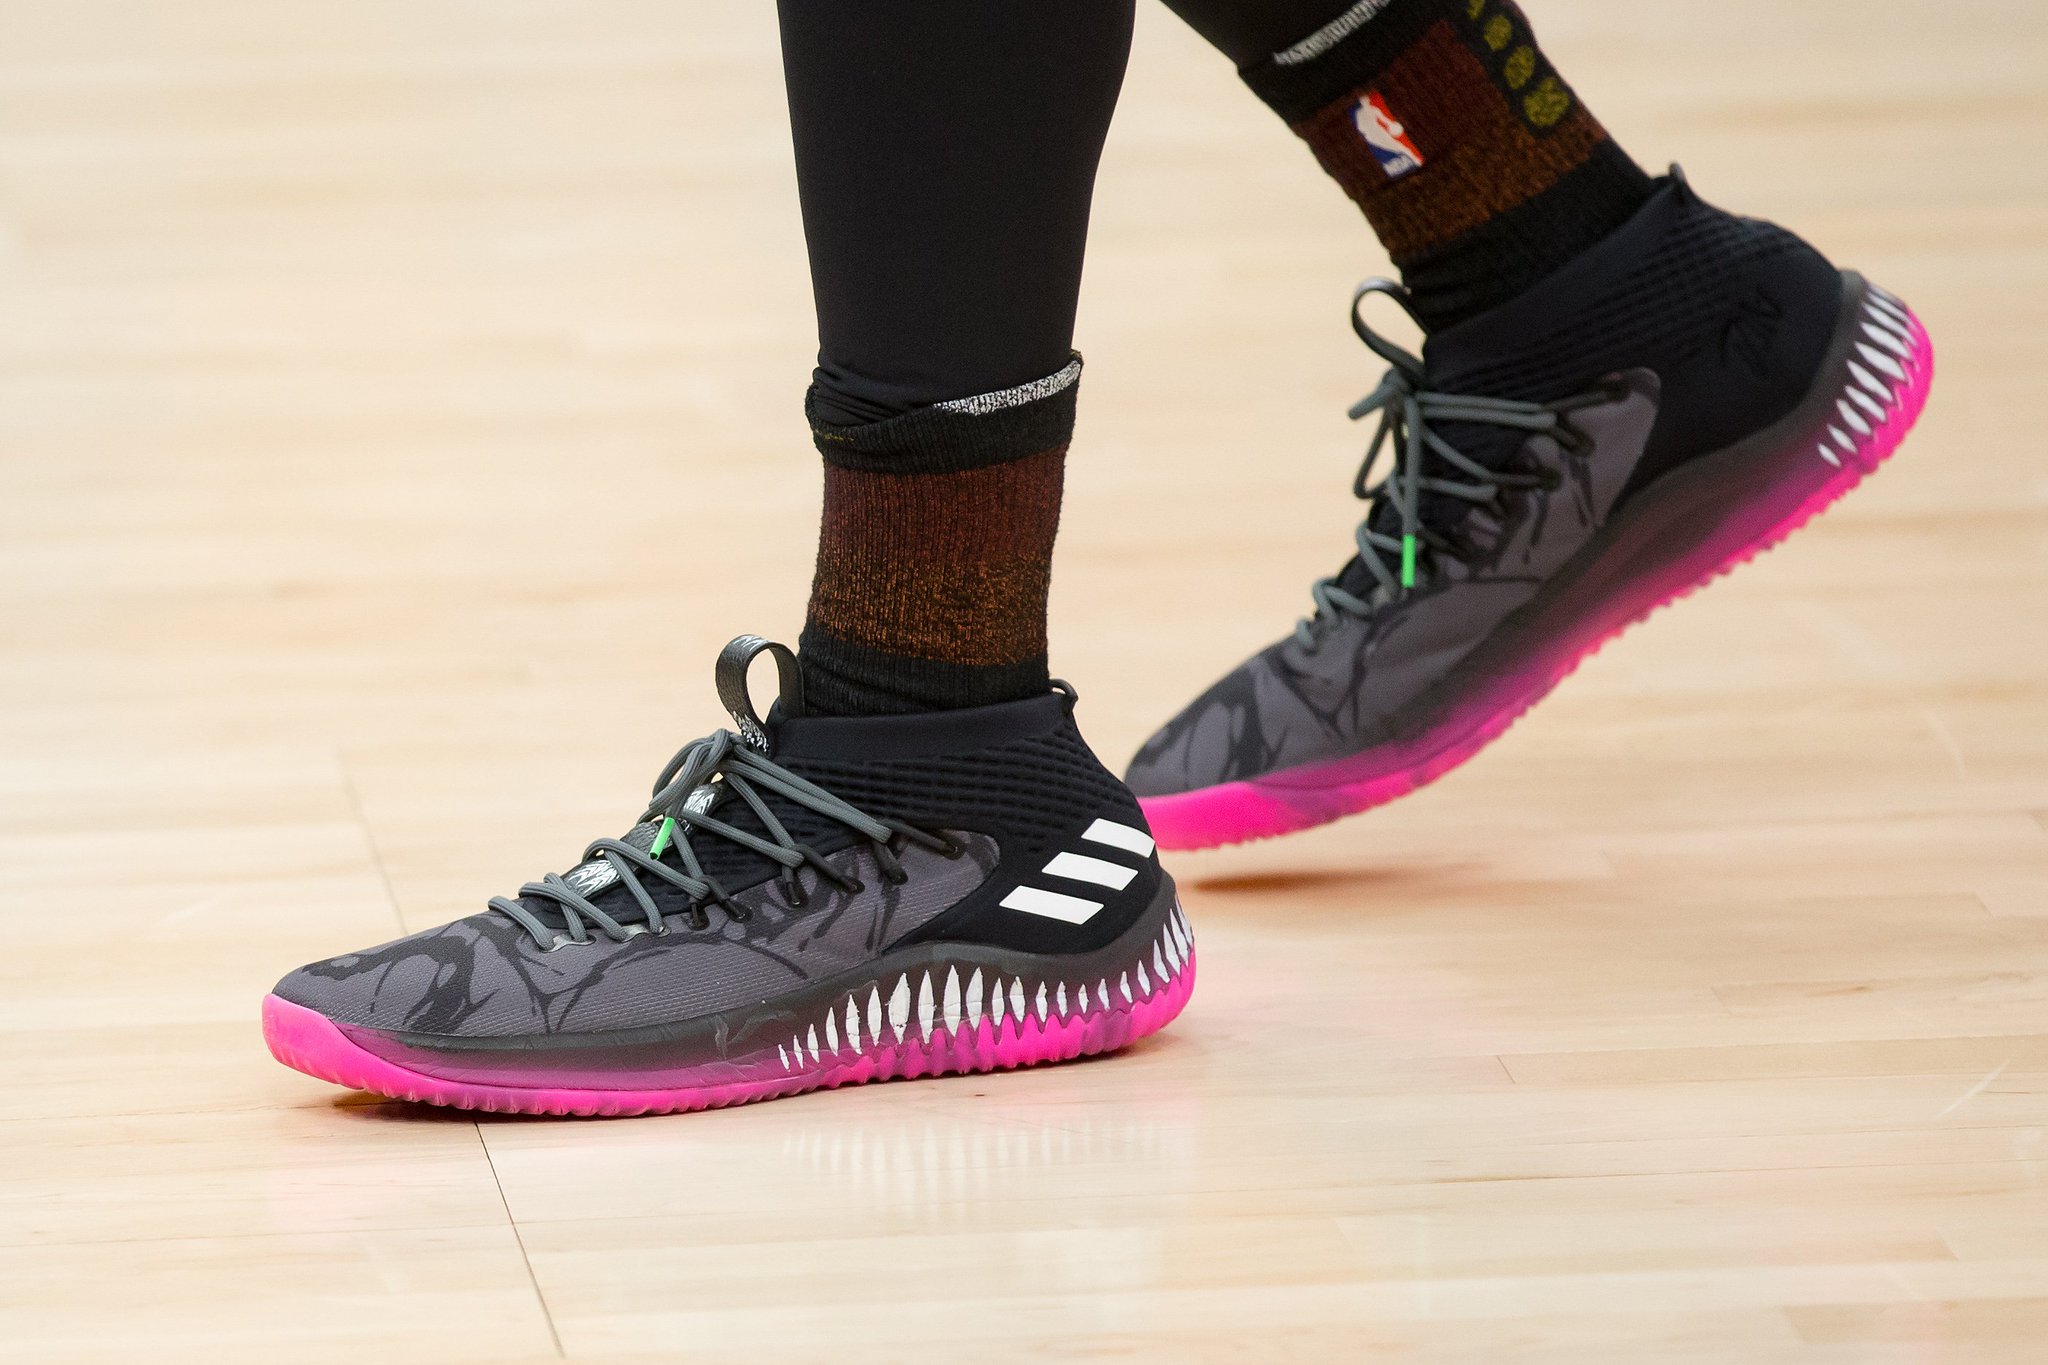 spidadmitchell wearing the adidas Dame 